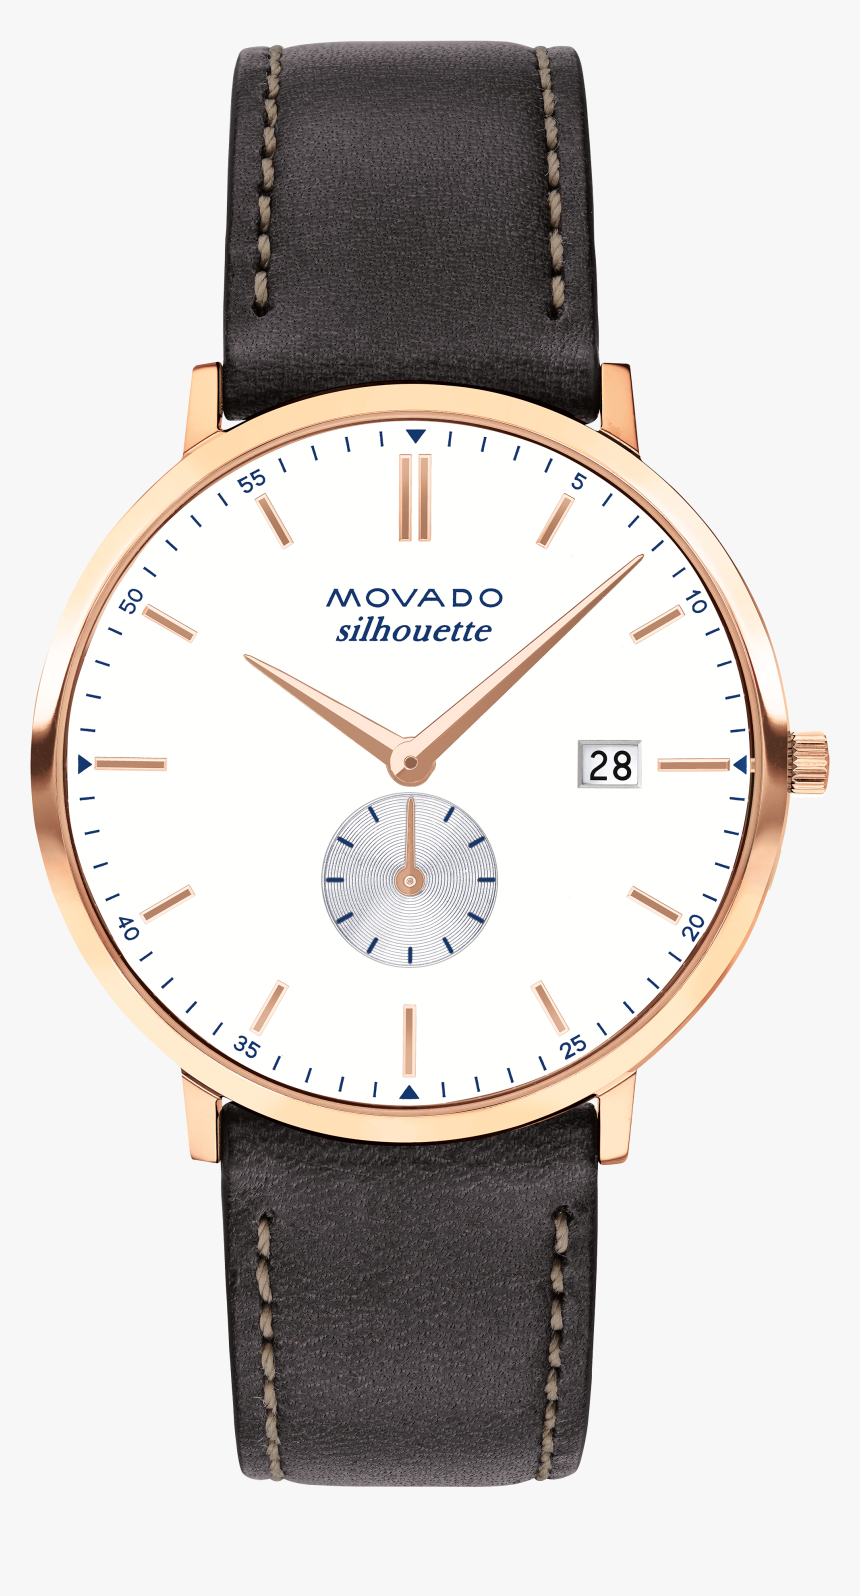 Movado Heritage Series - House Of Commons Watch, HD Png Download, Free Download